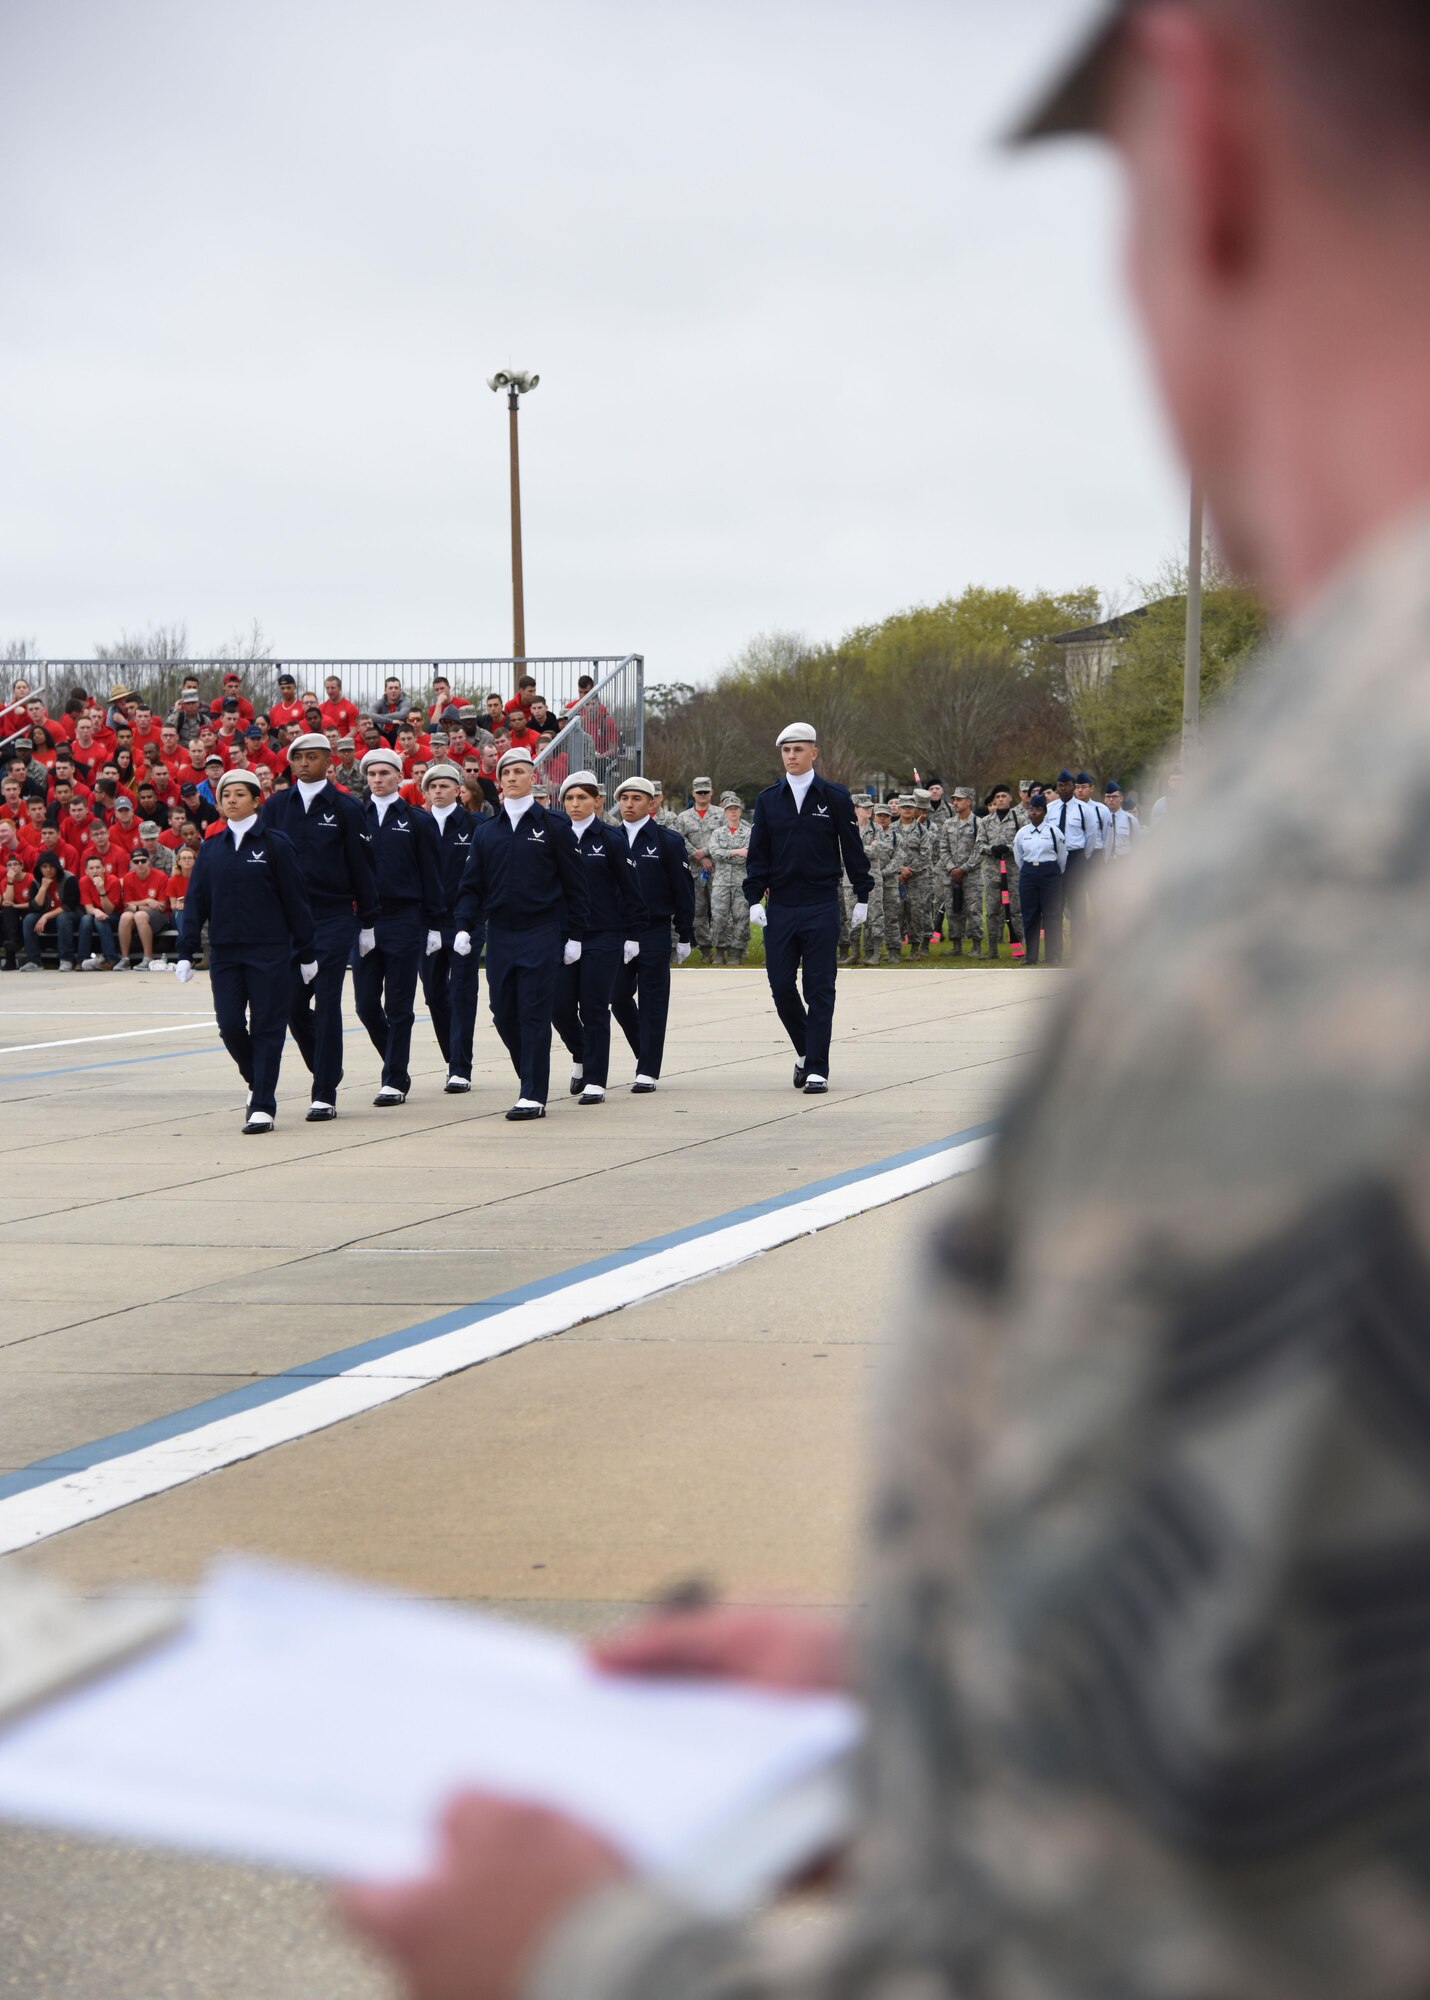 Members of the 334th Training Squadron regulation drill team perform during the 81st Training Group drill down at the Levitow Training Support Facility drill pad March 10, 2017, on Keesler Air Force Base, Miss. Airmen from the 81st Training Group competed in a quarterly open ranks inspection, regulation drill routine and freestyle drill routine with the 334th TRS “Gators” taking first place. (U.S. Air Force photo by Kemberly Groue)